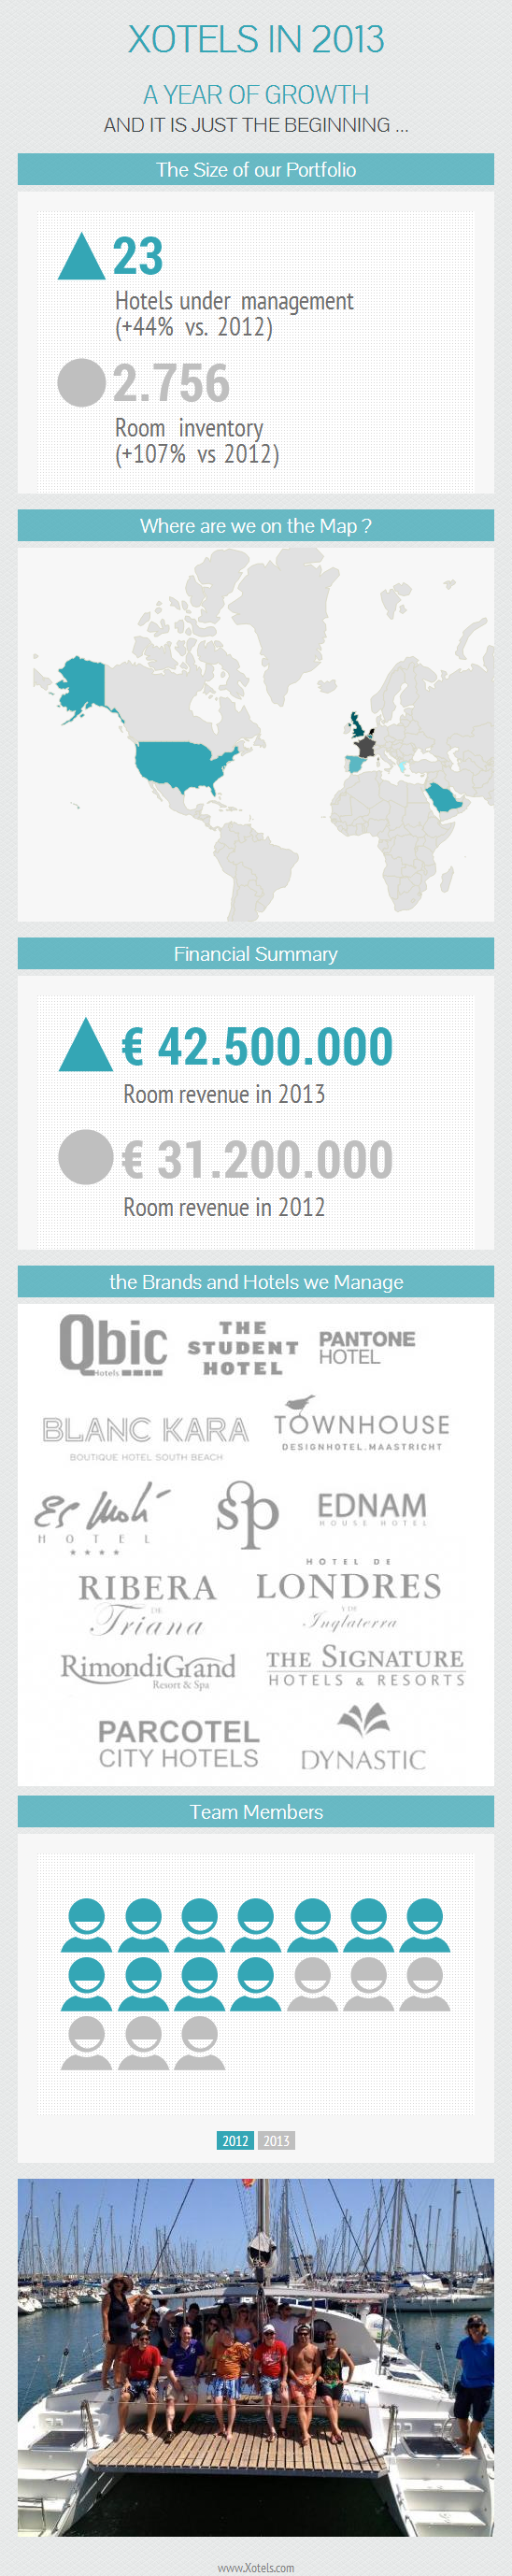 Infographic Xotels in 2013